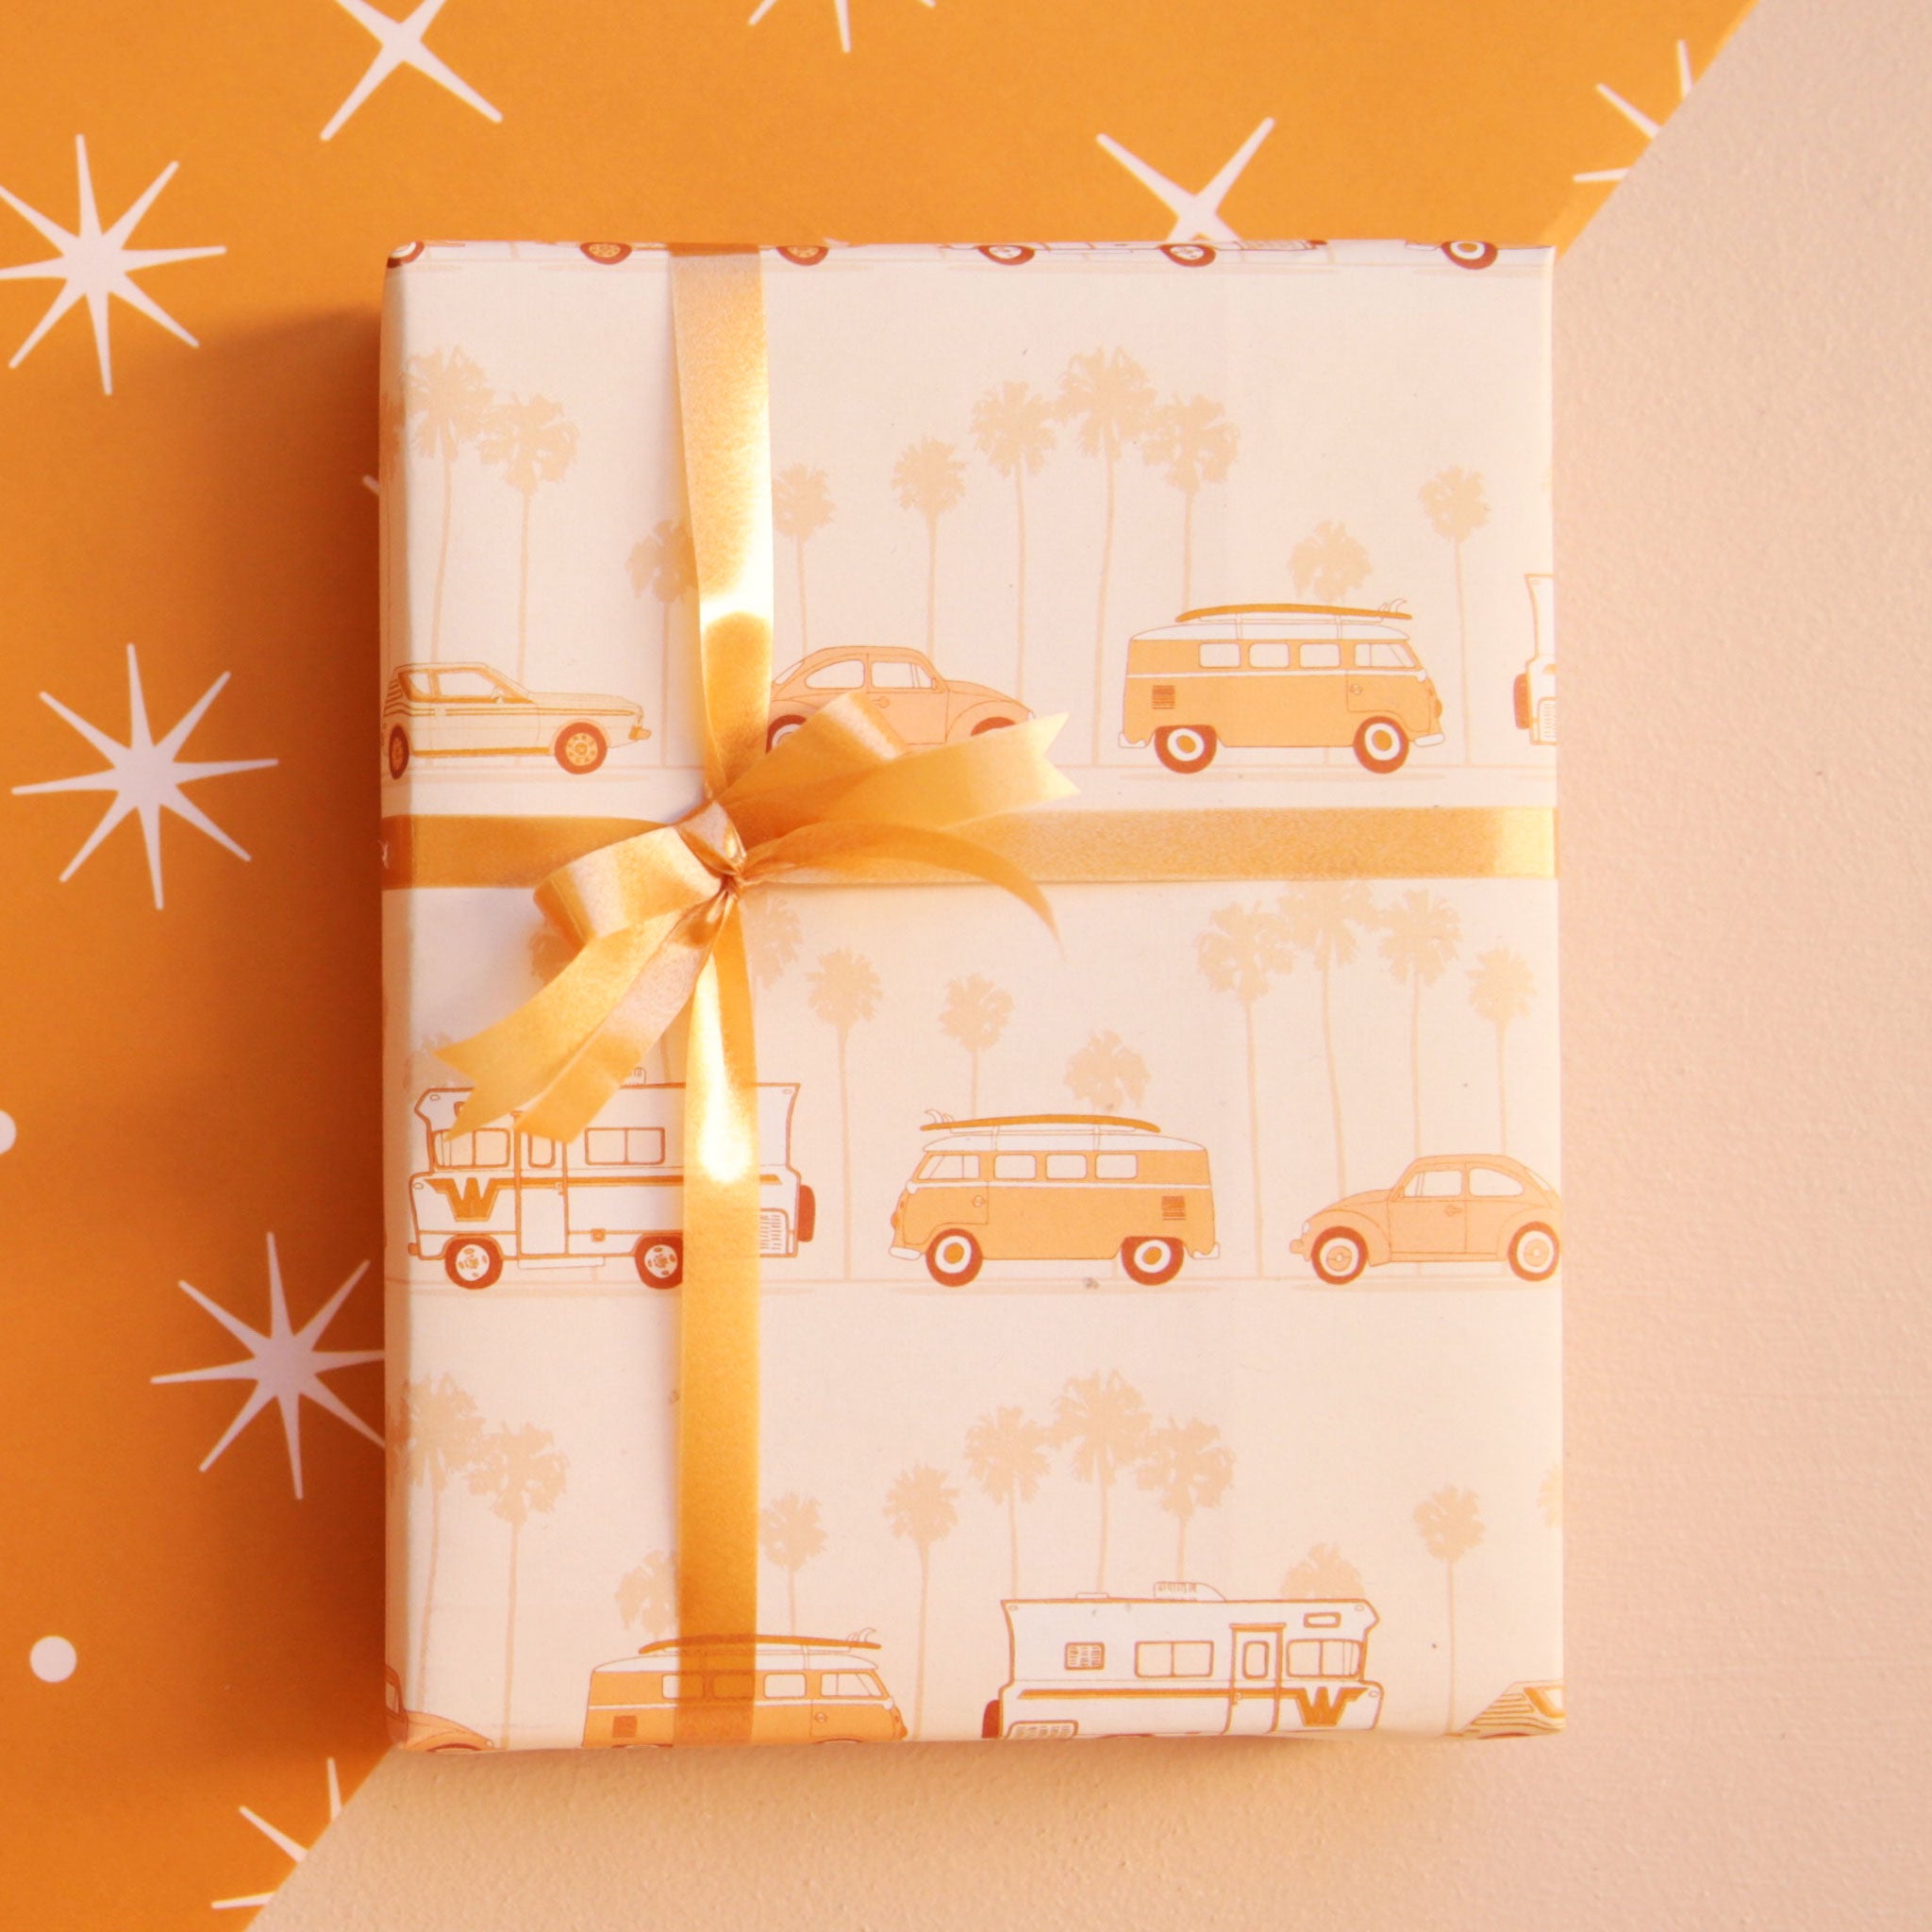 A light orange wrapping paper with a repeating pattern of darker shades of orange vintage VW vehicles including the VW bus, bug and a camper van that are in front of faed palm trees in the background. This photo shows the wrapping paper in use on a gift with an orange ribbon bow.